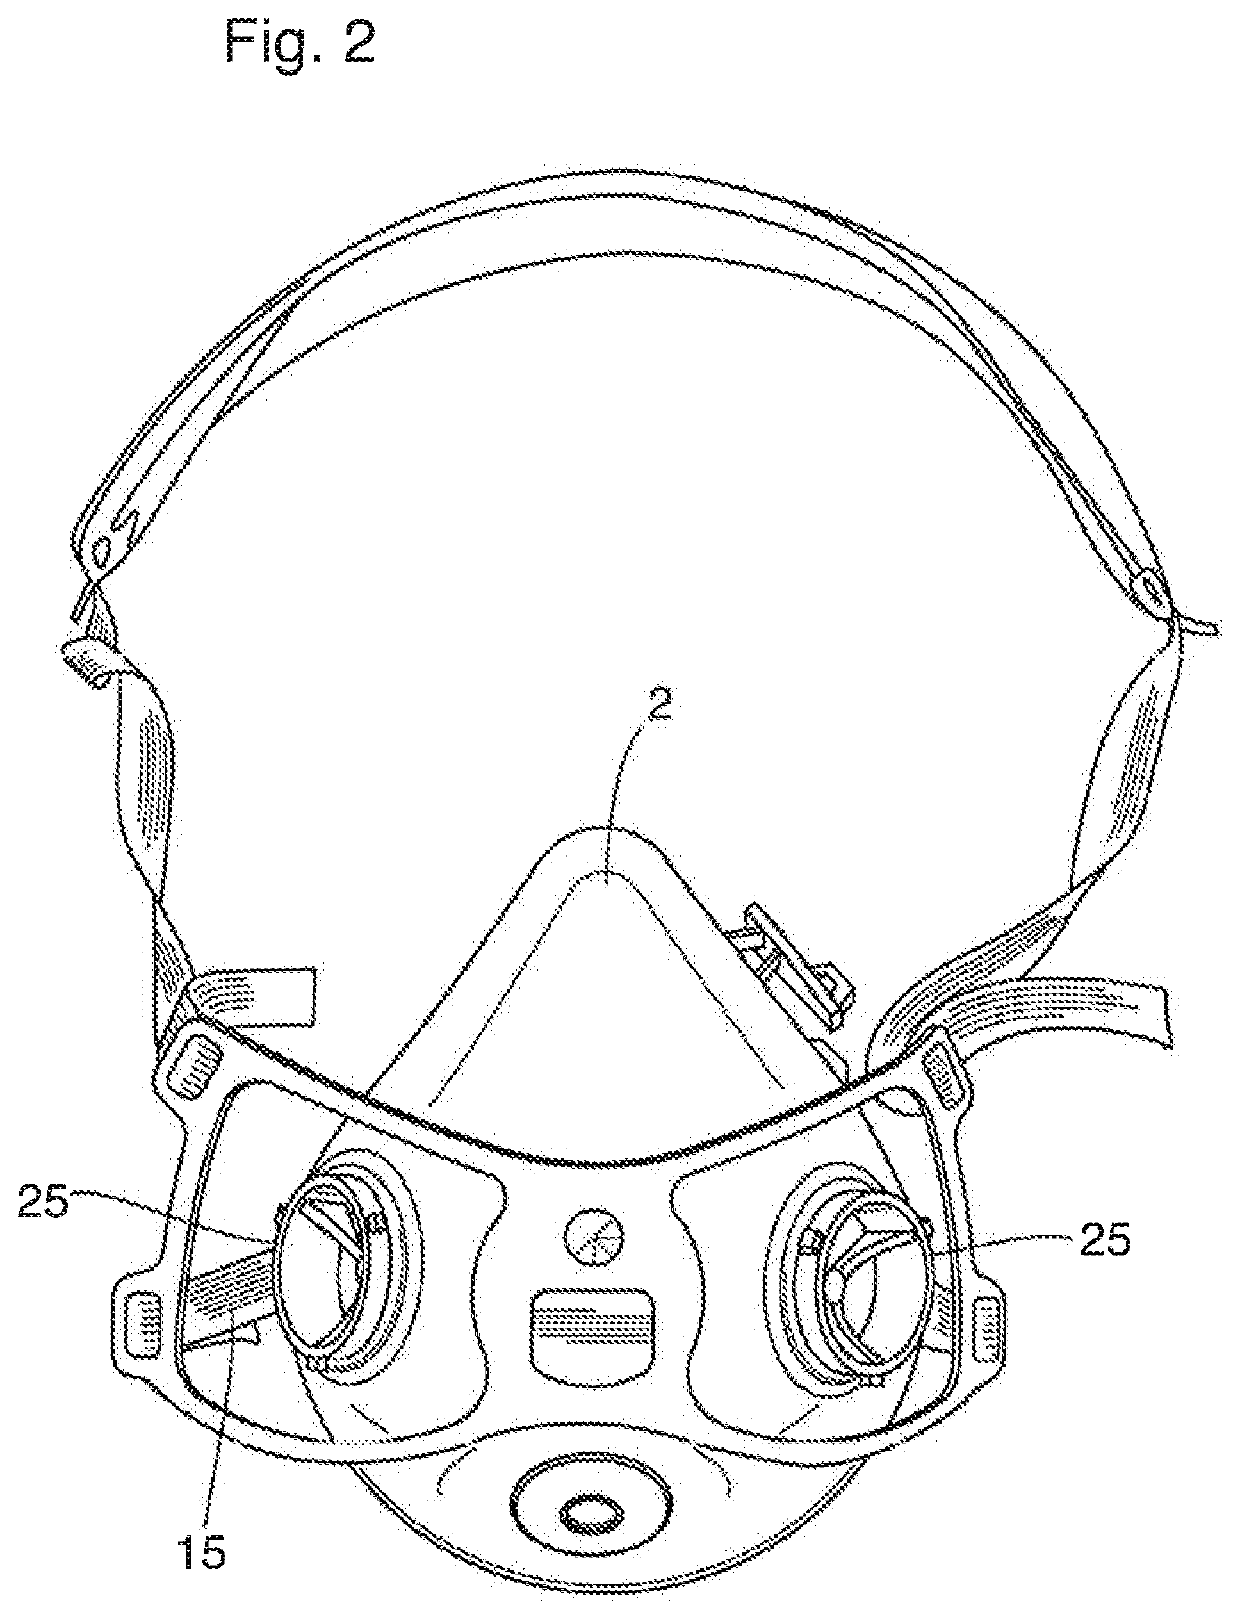 Respirator device with common inhalation and exhalation filters